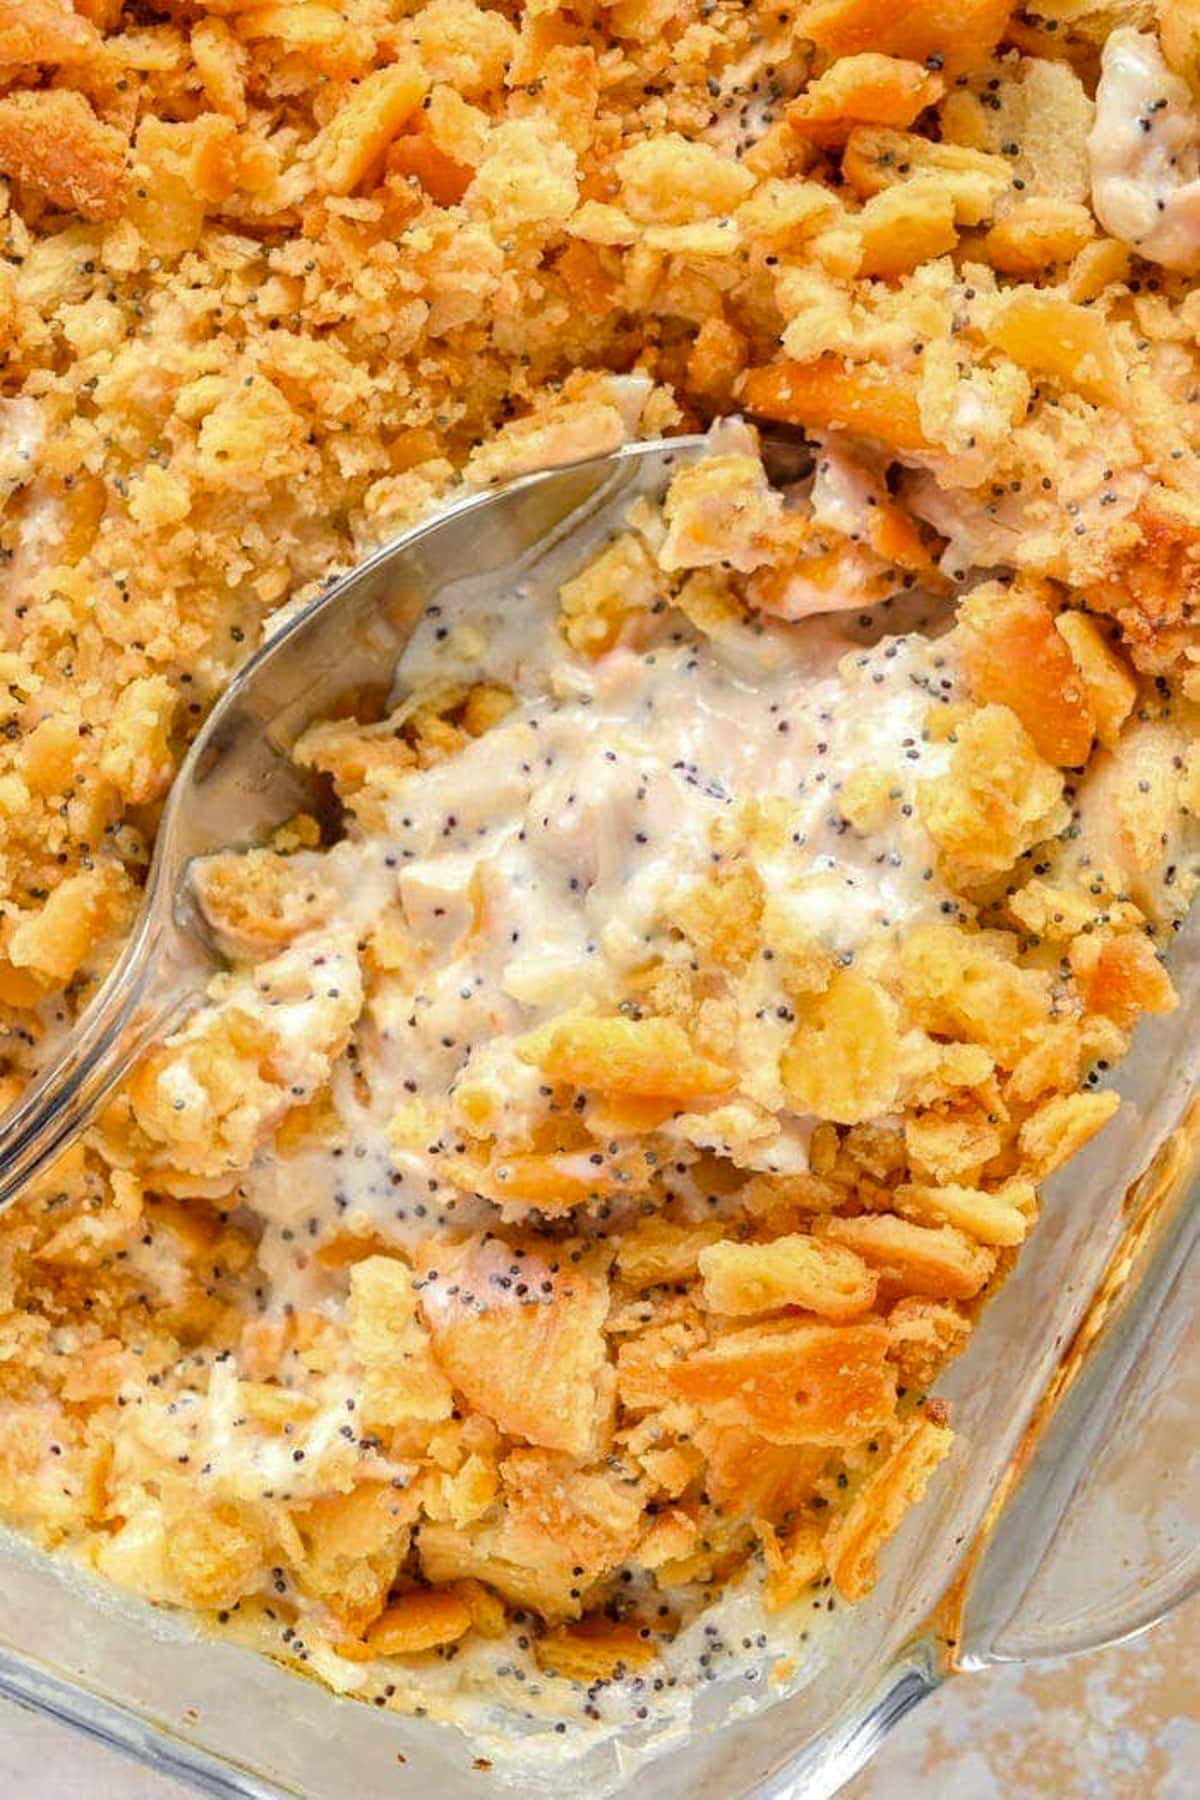 Poppy seed chicken casserole topped with Ritz crackers in a large dish, with a large spoon breaking through the crackers to show the creamy casserole beneath.